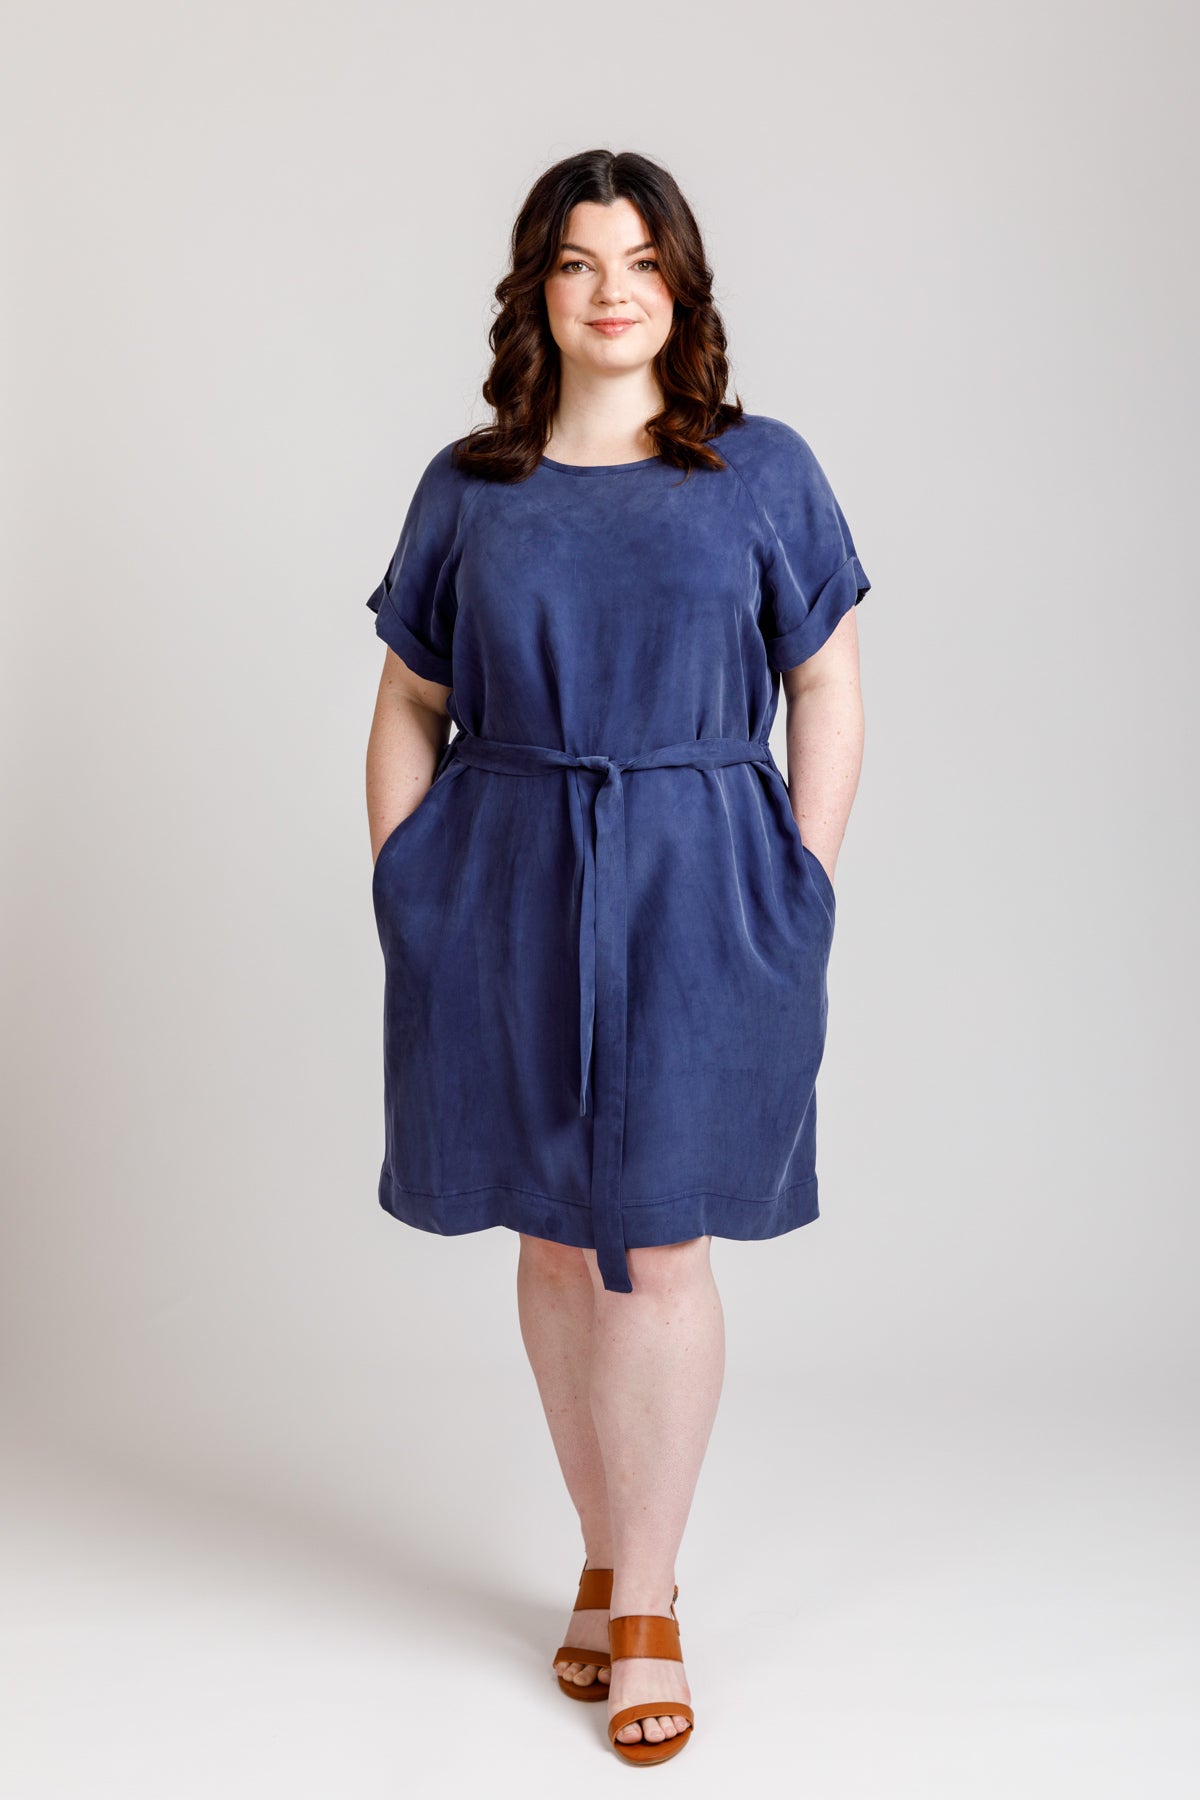 River Curve Dress & Top Sewing Pattern